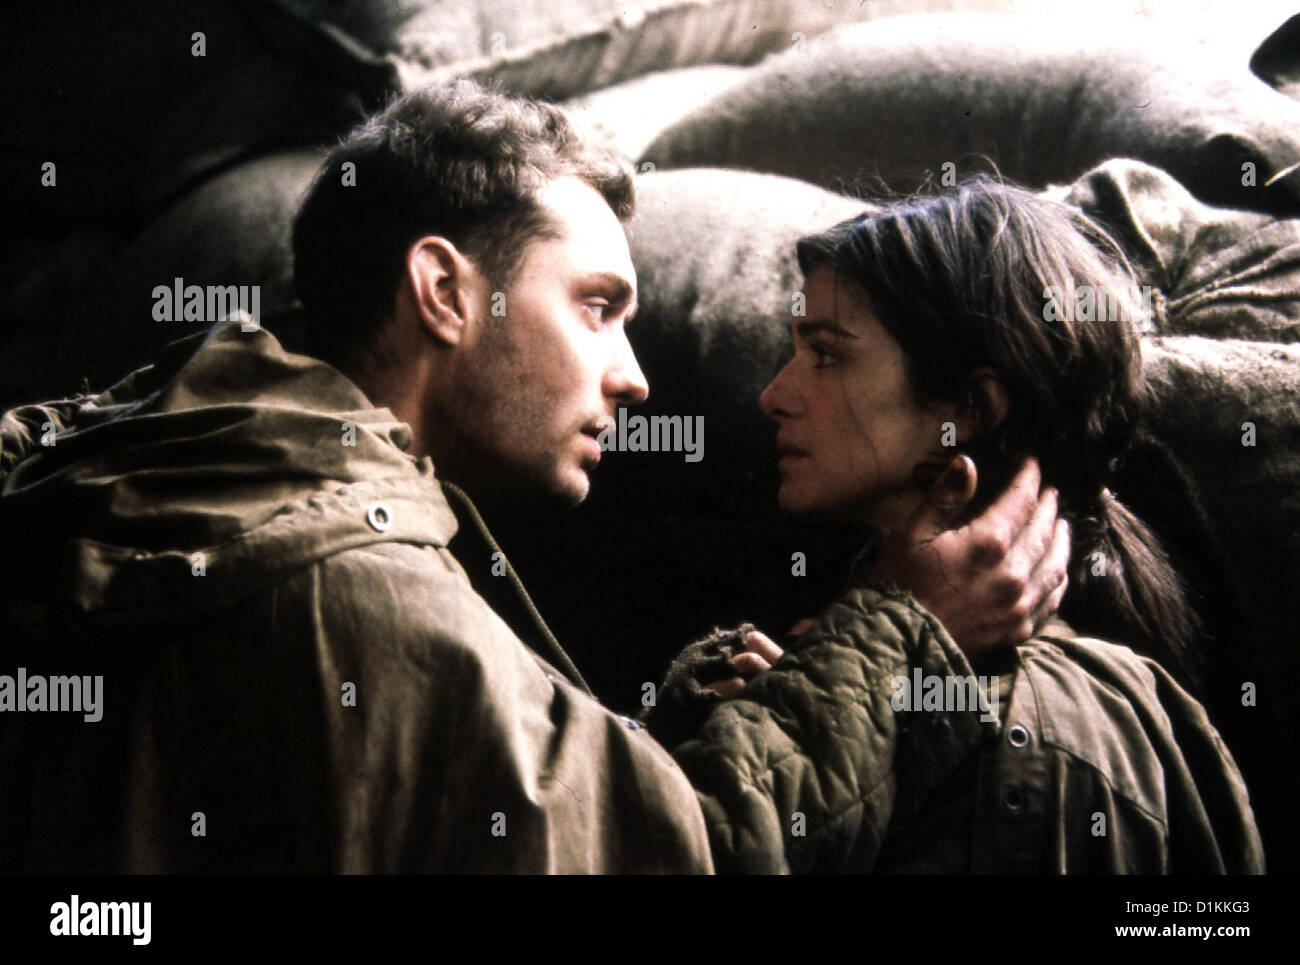 Duell - Enemy At Gates  Duell - Enemy At Gates  Vassili (Jude Law), Tania (Rachel Weisz) *** Local Caption *** 2000 Constantin Stock Photo